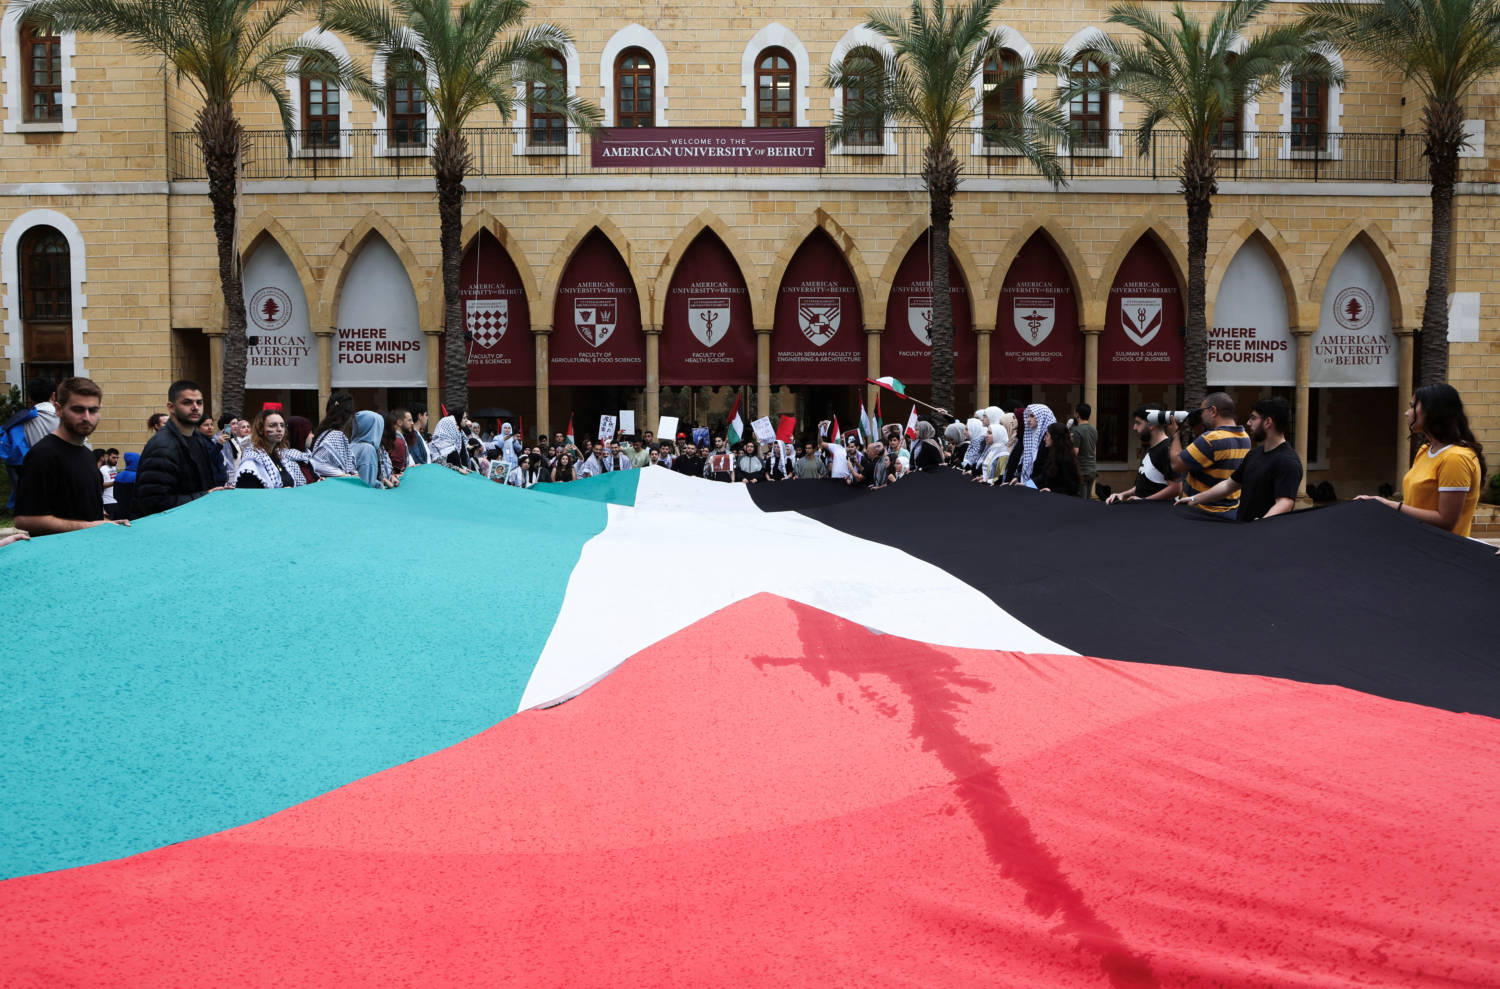 Demonstrators Hold A Palestinian Flag During A Protest In Solidarity With Gaza At The American University Of Beirut